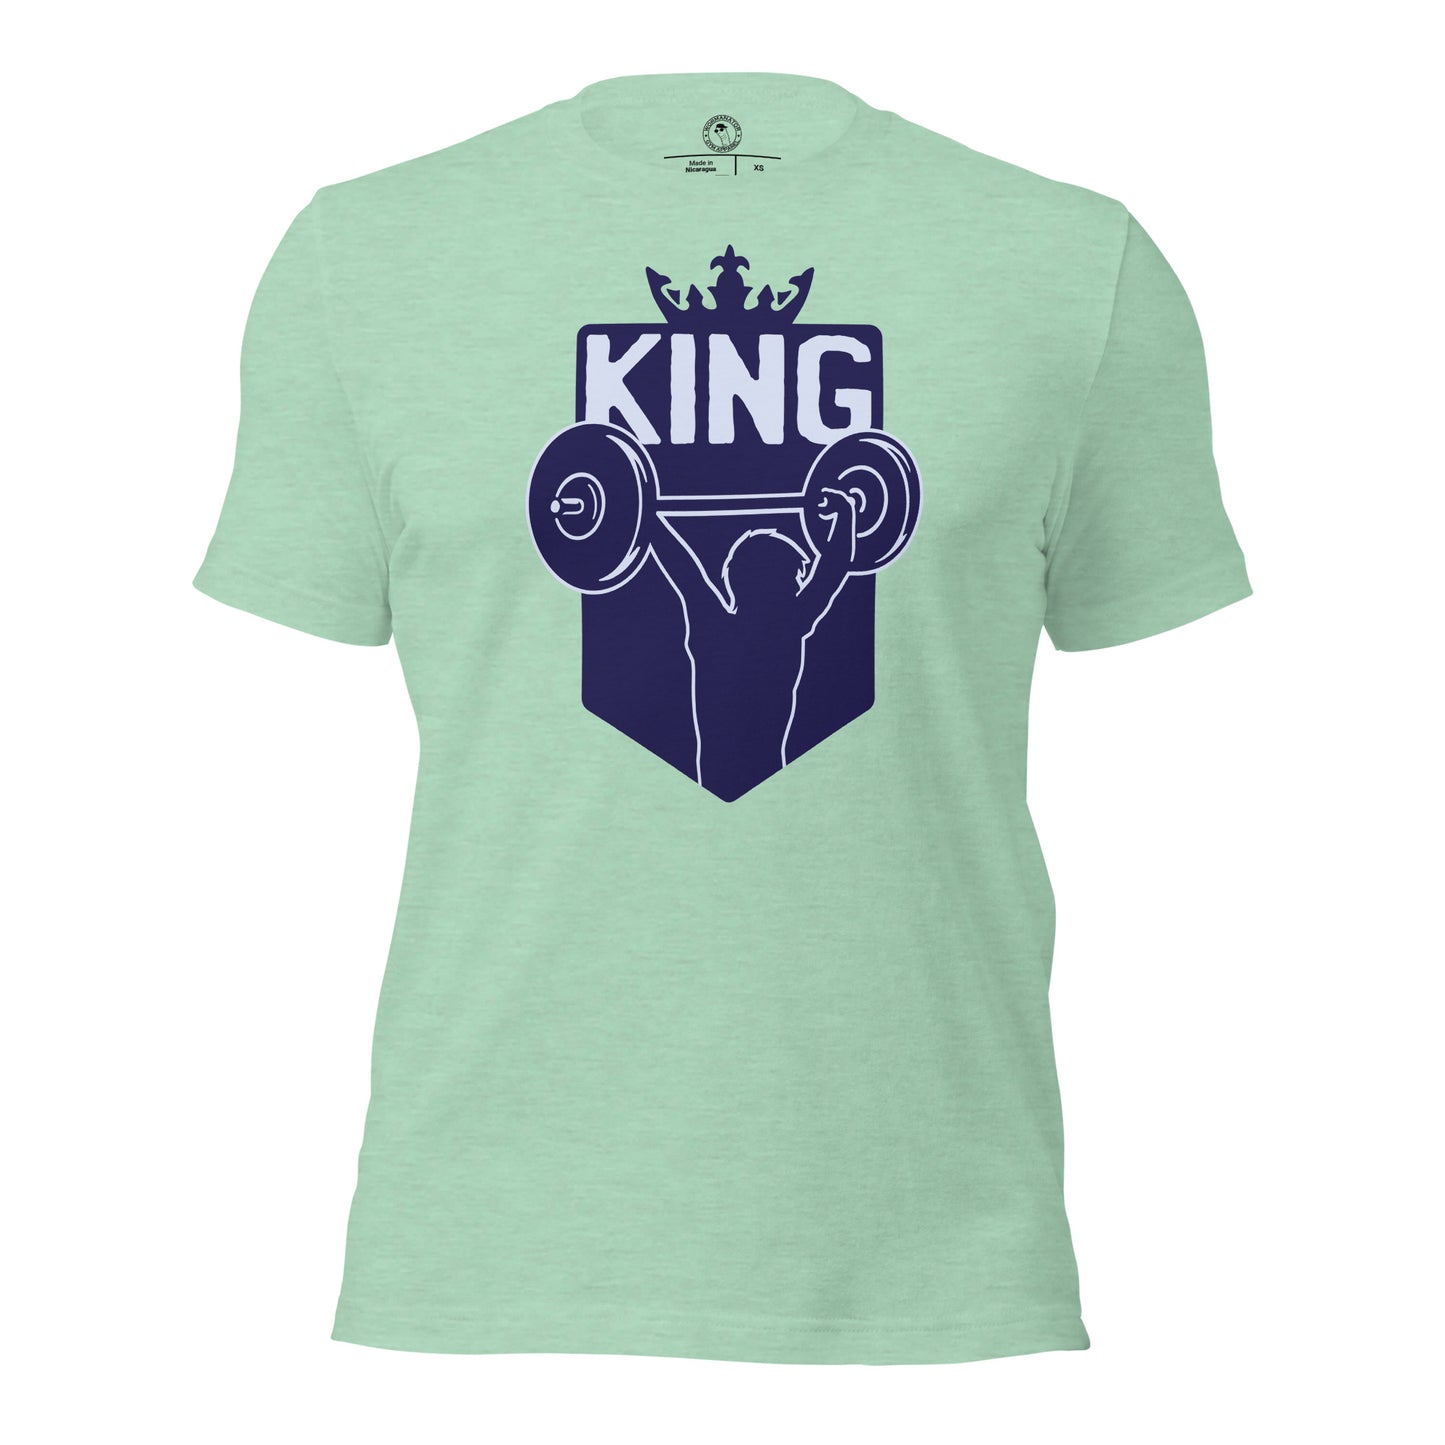 Gym King Shirt in Heather Prism Mint